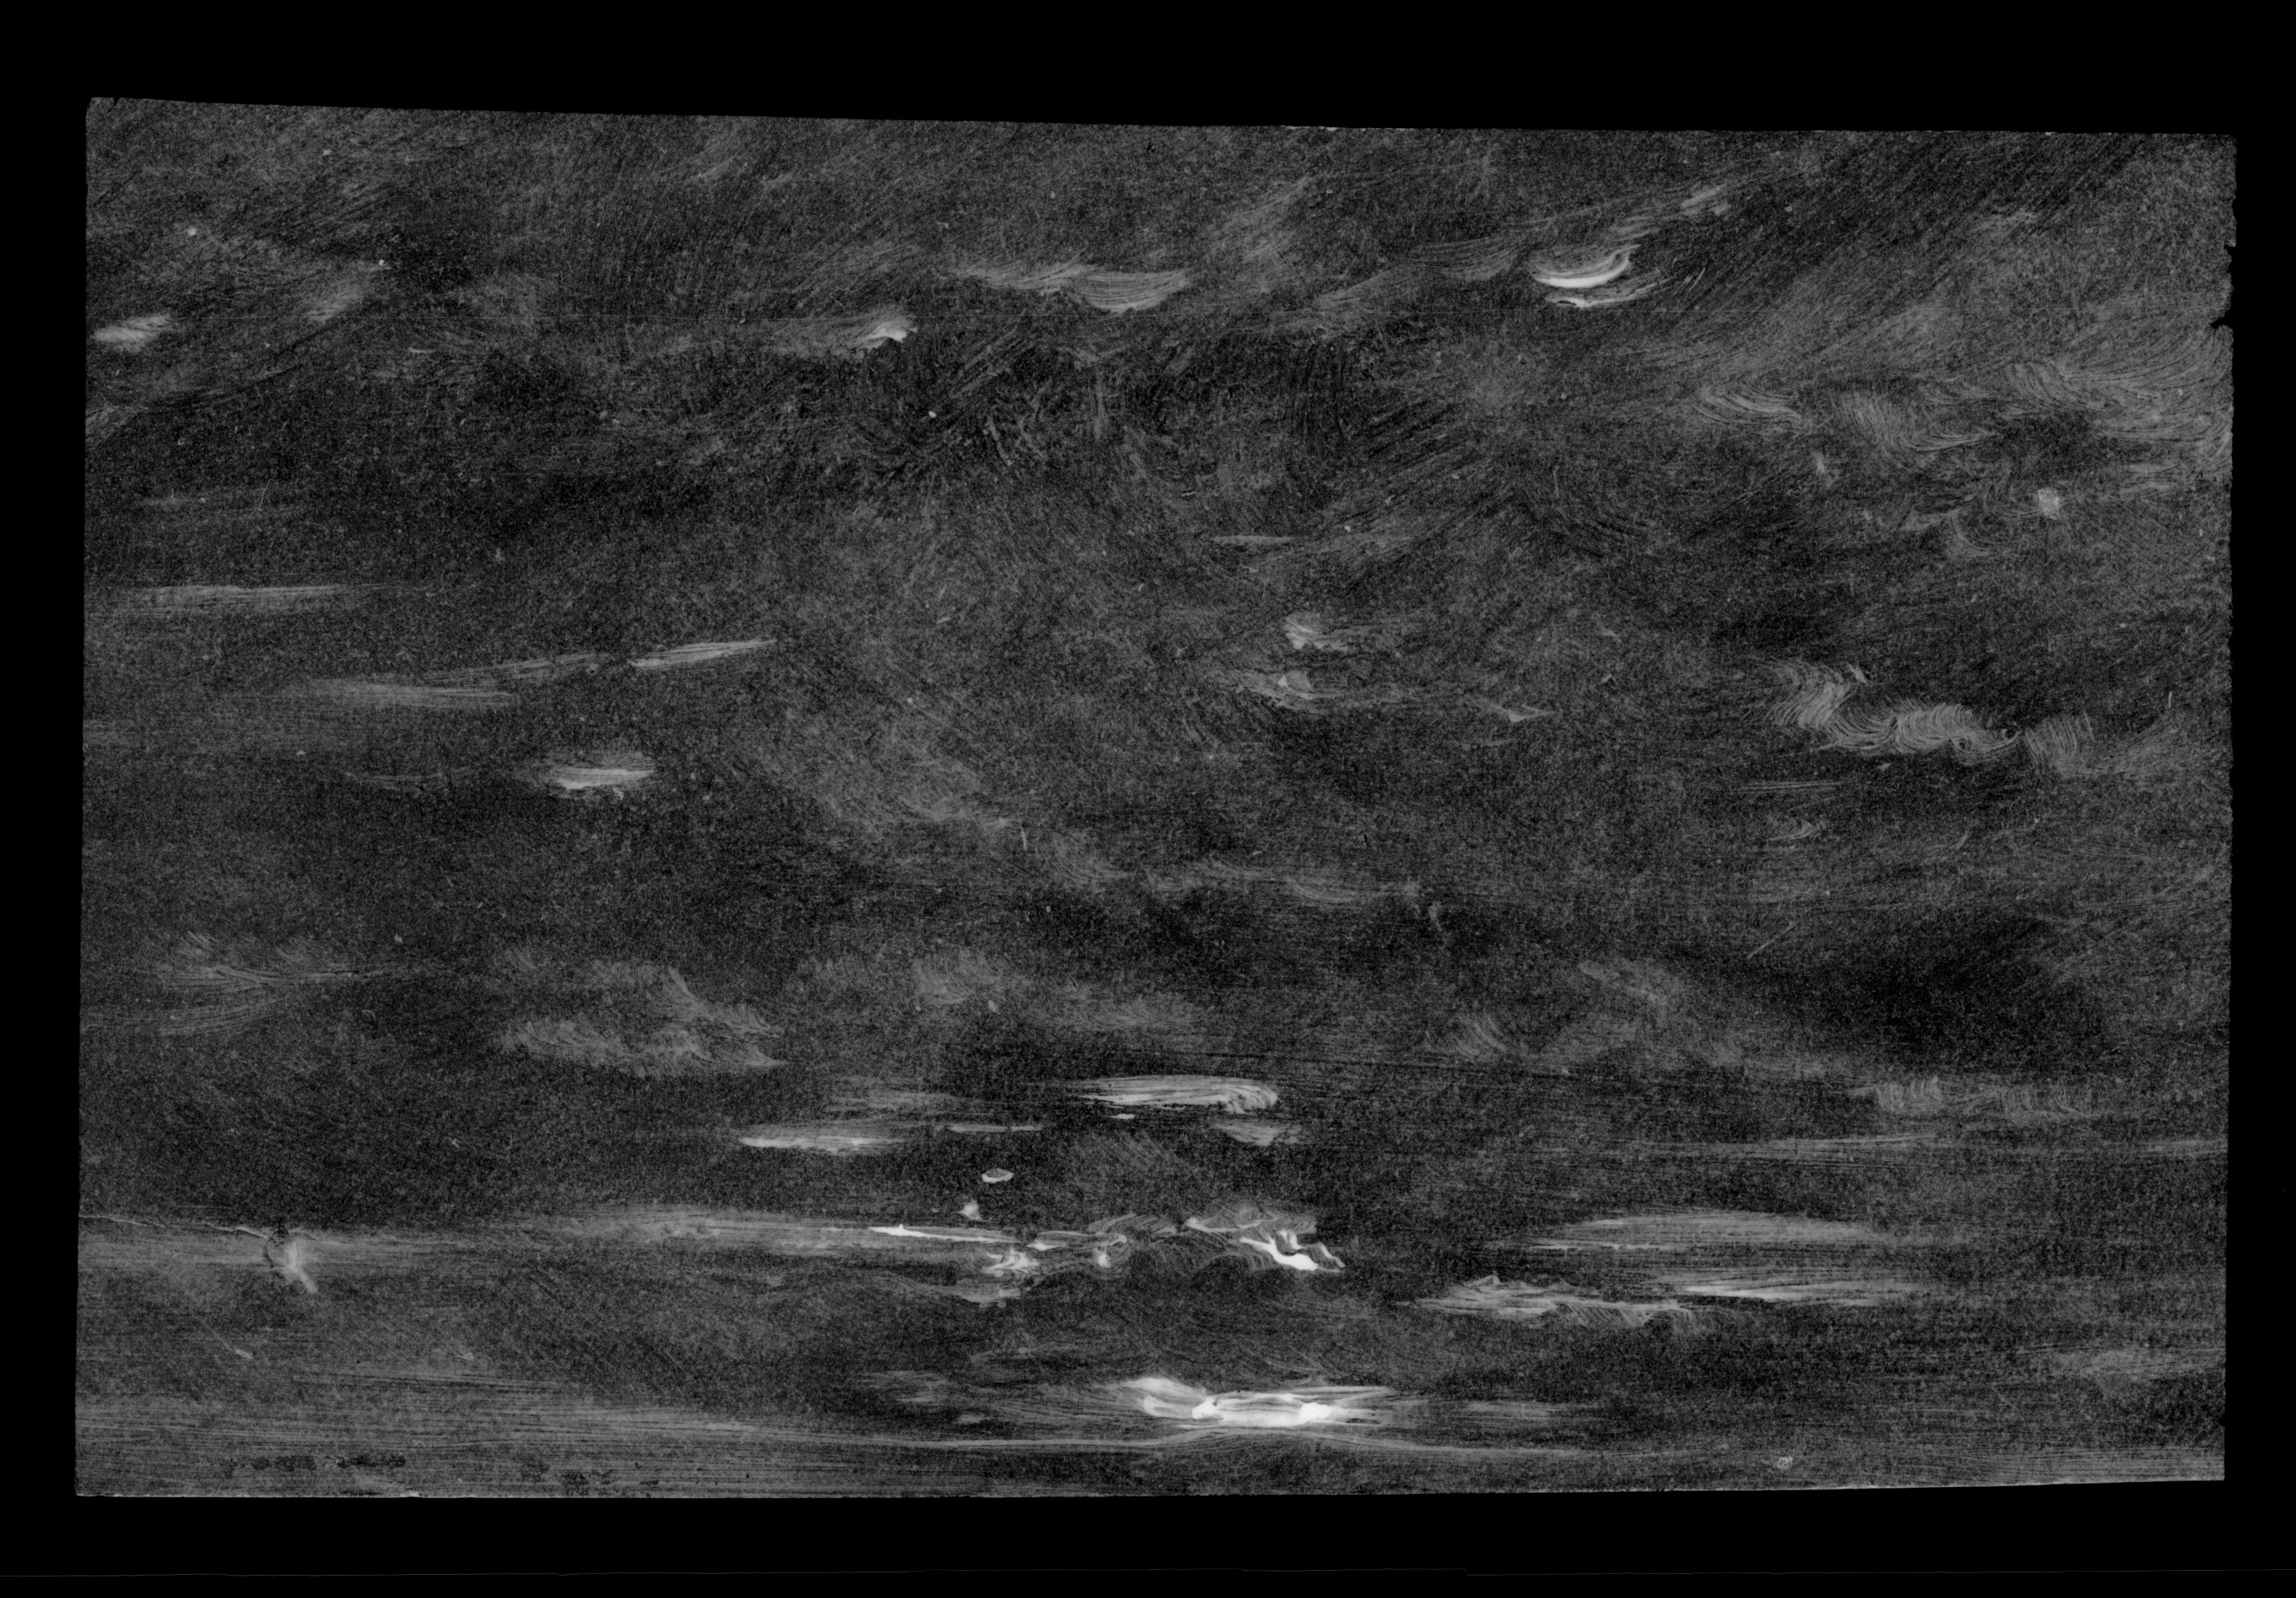 A black and white x-ray image of a skyscape sketch in oils on paper that looks like white brushstrokes on a black background